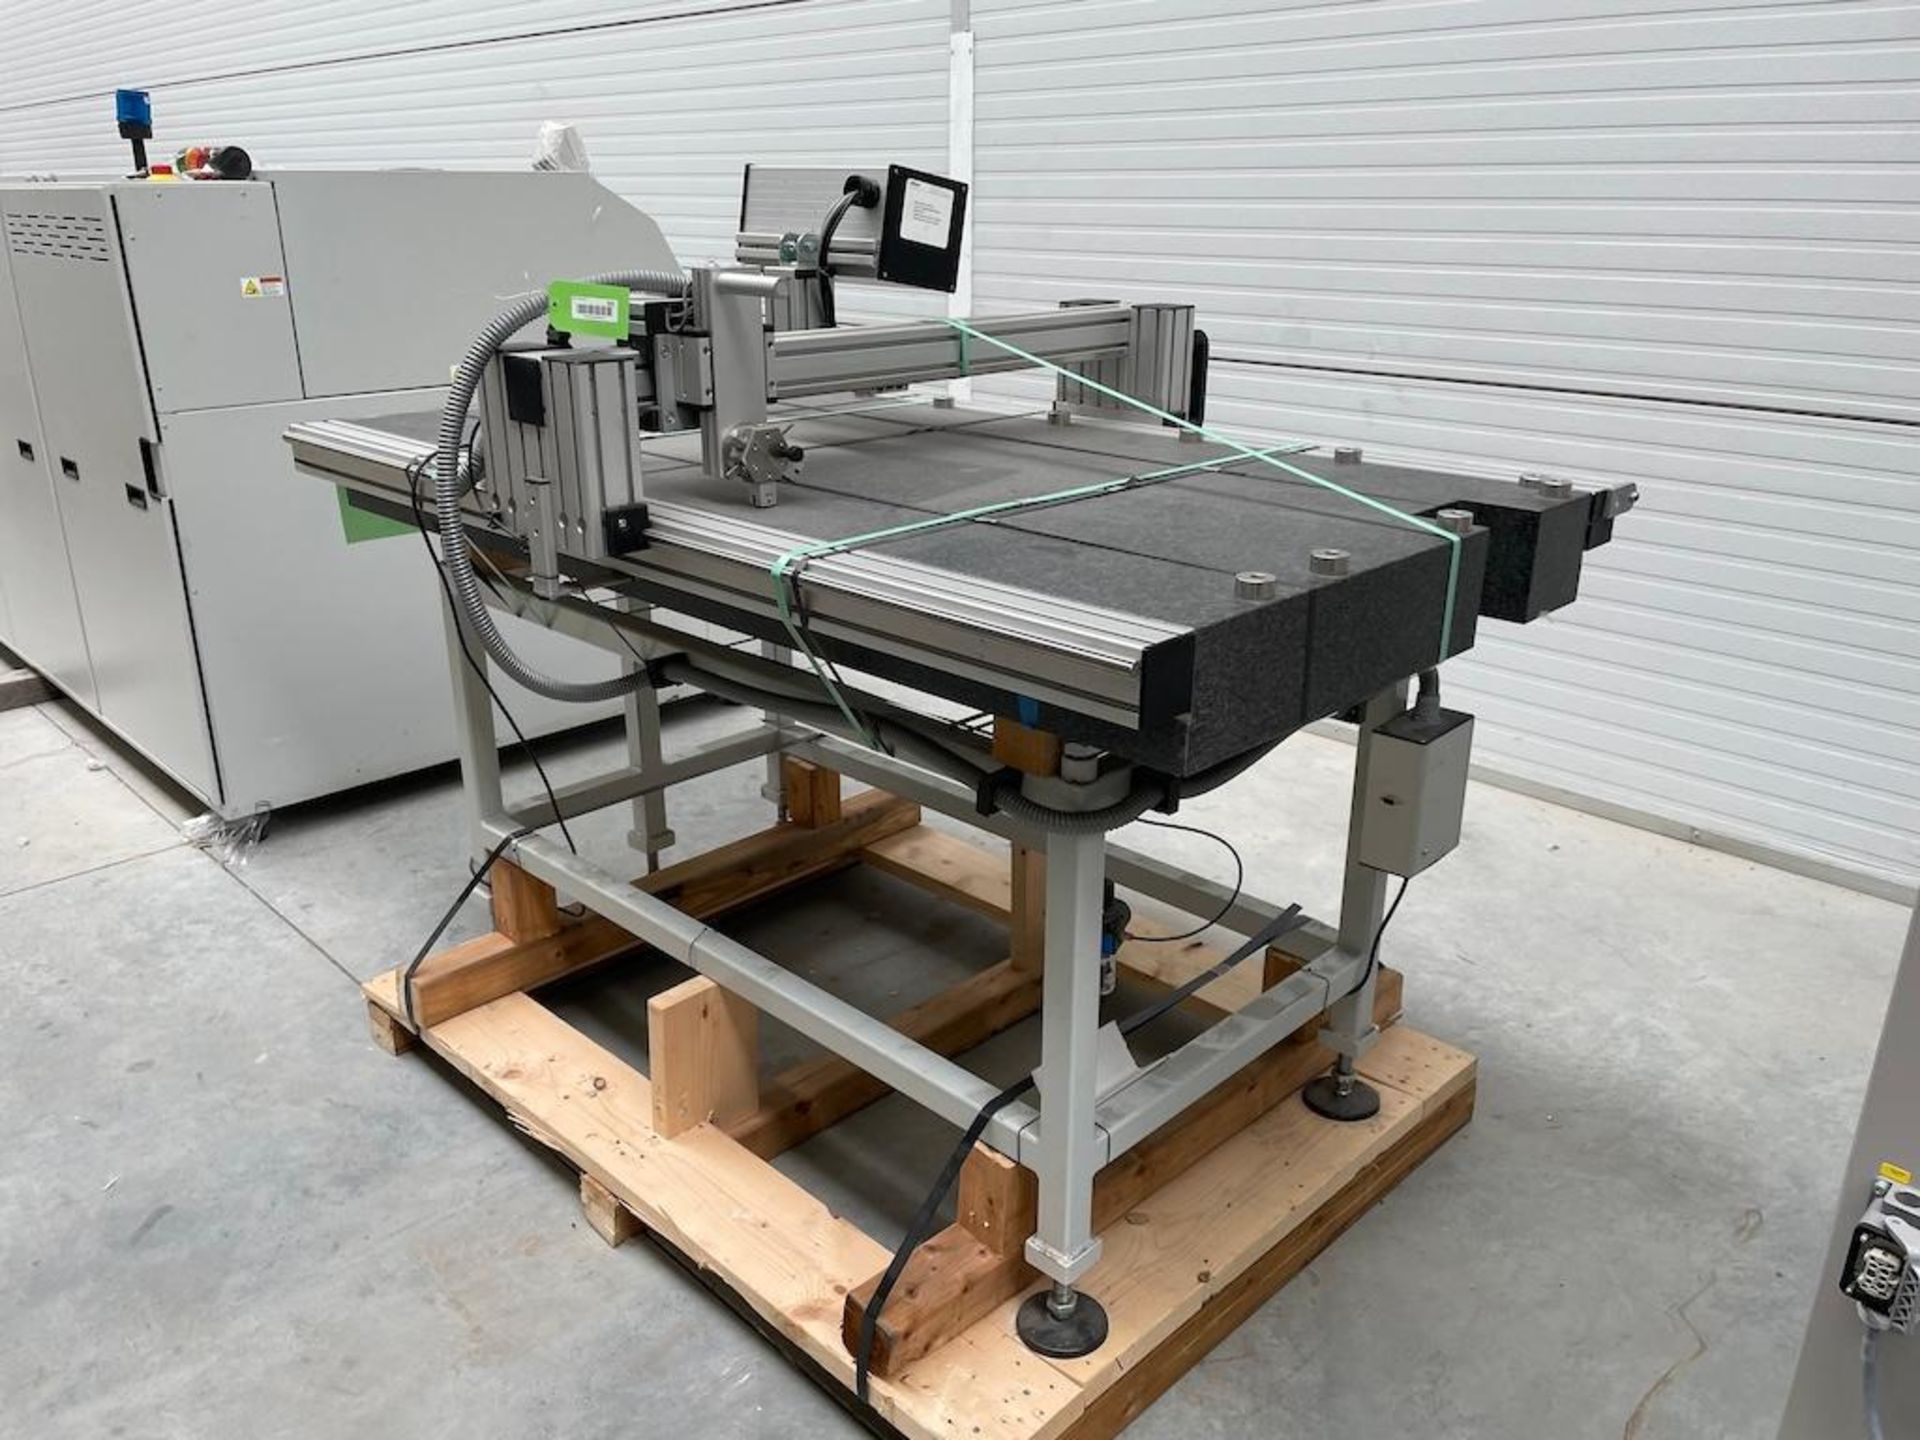 OELZE HECHT MEASURING TABLE 1800 X 900 X 150 MM, DIGITAL CONTROLS [MATANE] *PLEASE NOTE, EXCLUSIVE R - Image 2 of 2